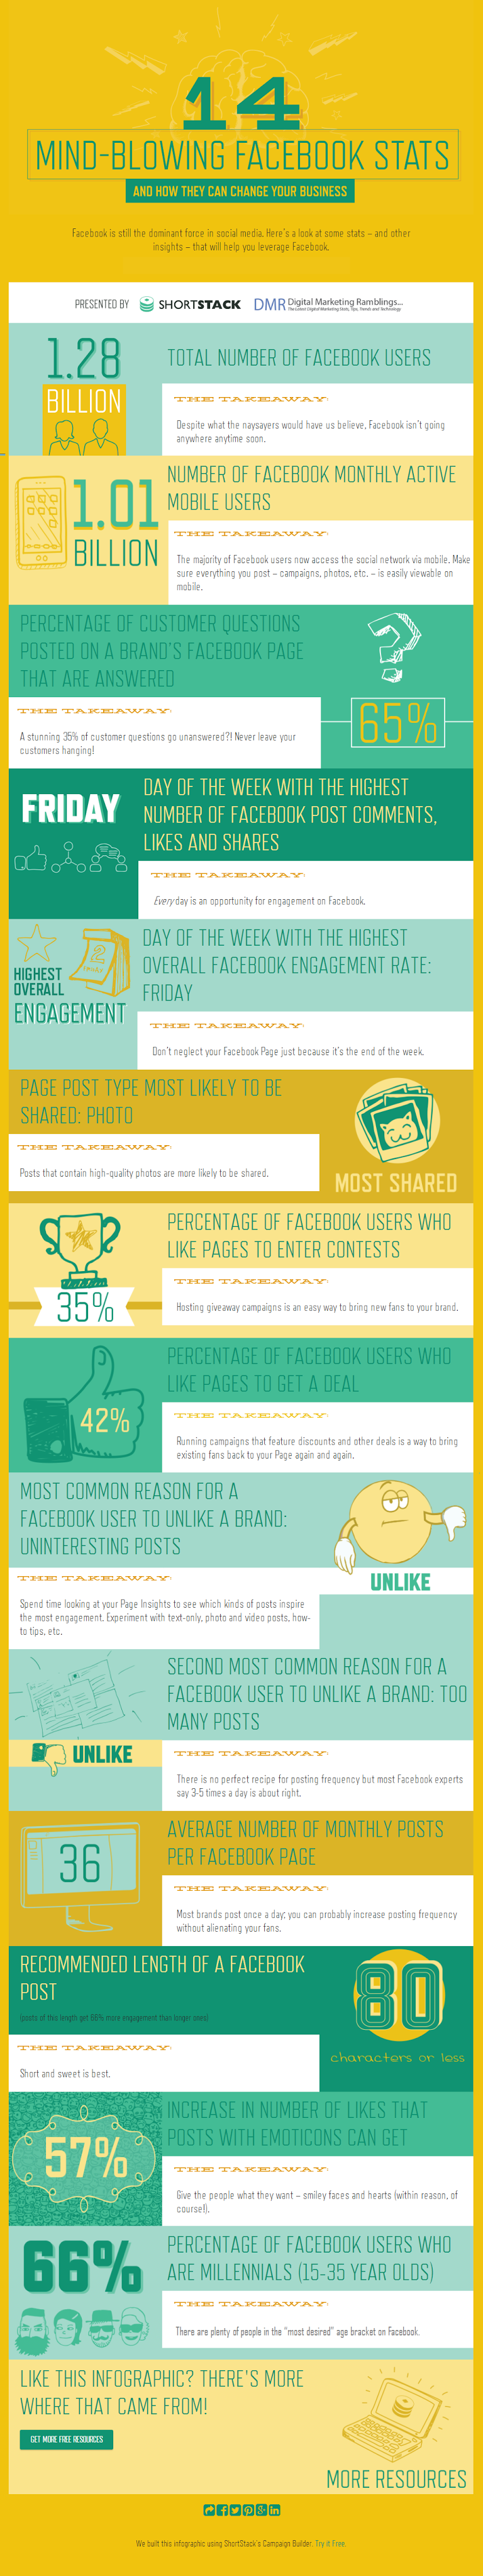 14 Amazing Facebook insights Social Media Marketers Need to Know - #infographic